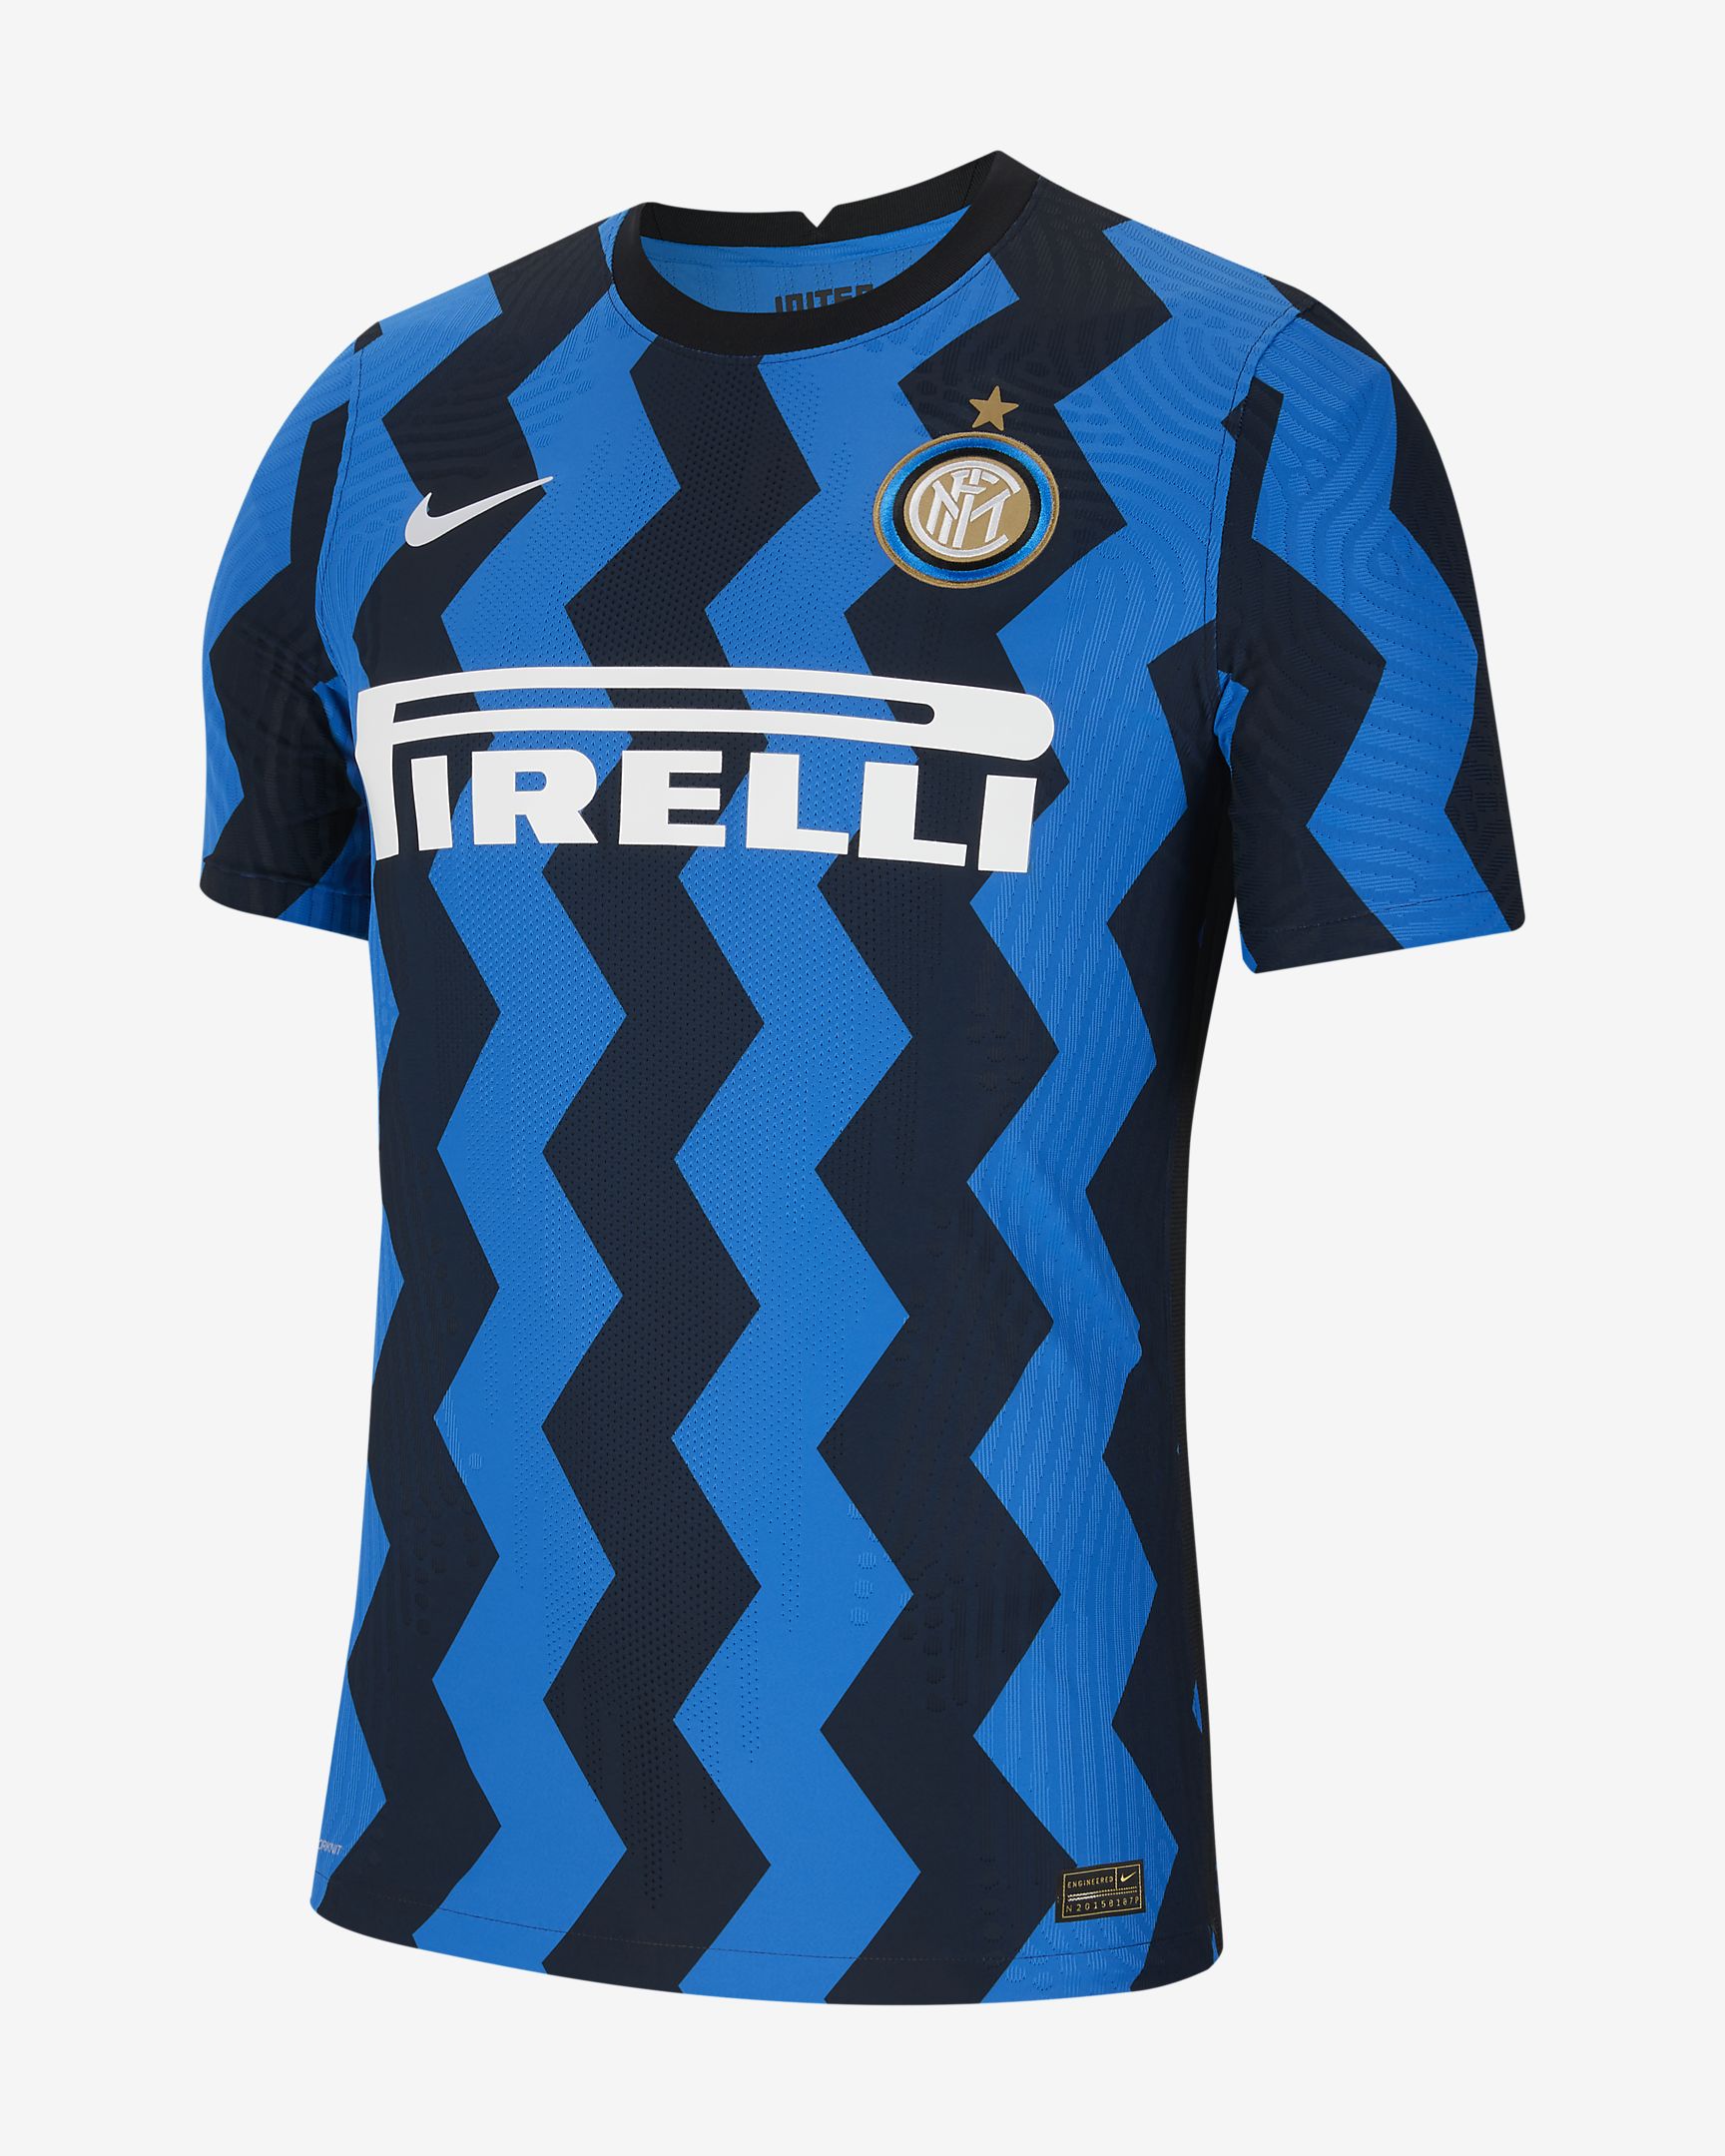 Inter Milan release new kit ahead of 